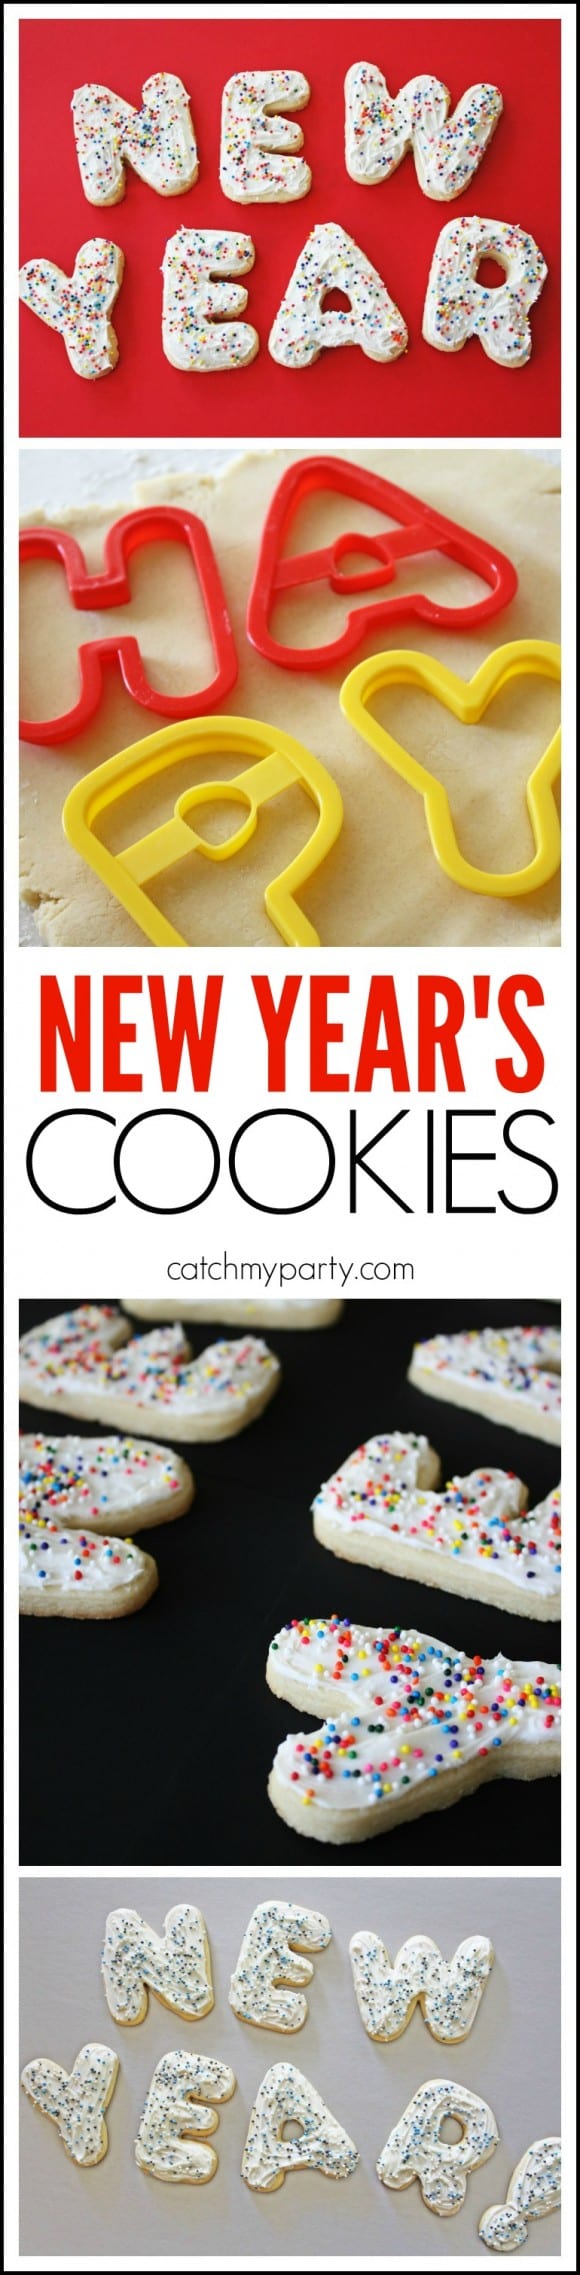 Happy New Year Cookie Letters! See more party ideas at CatchMyParty.com.